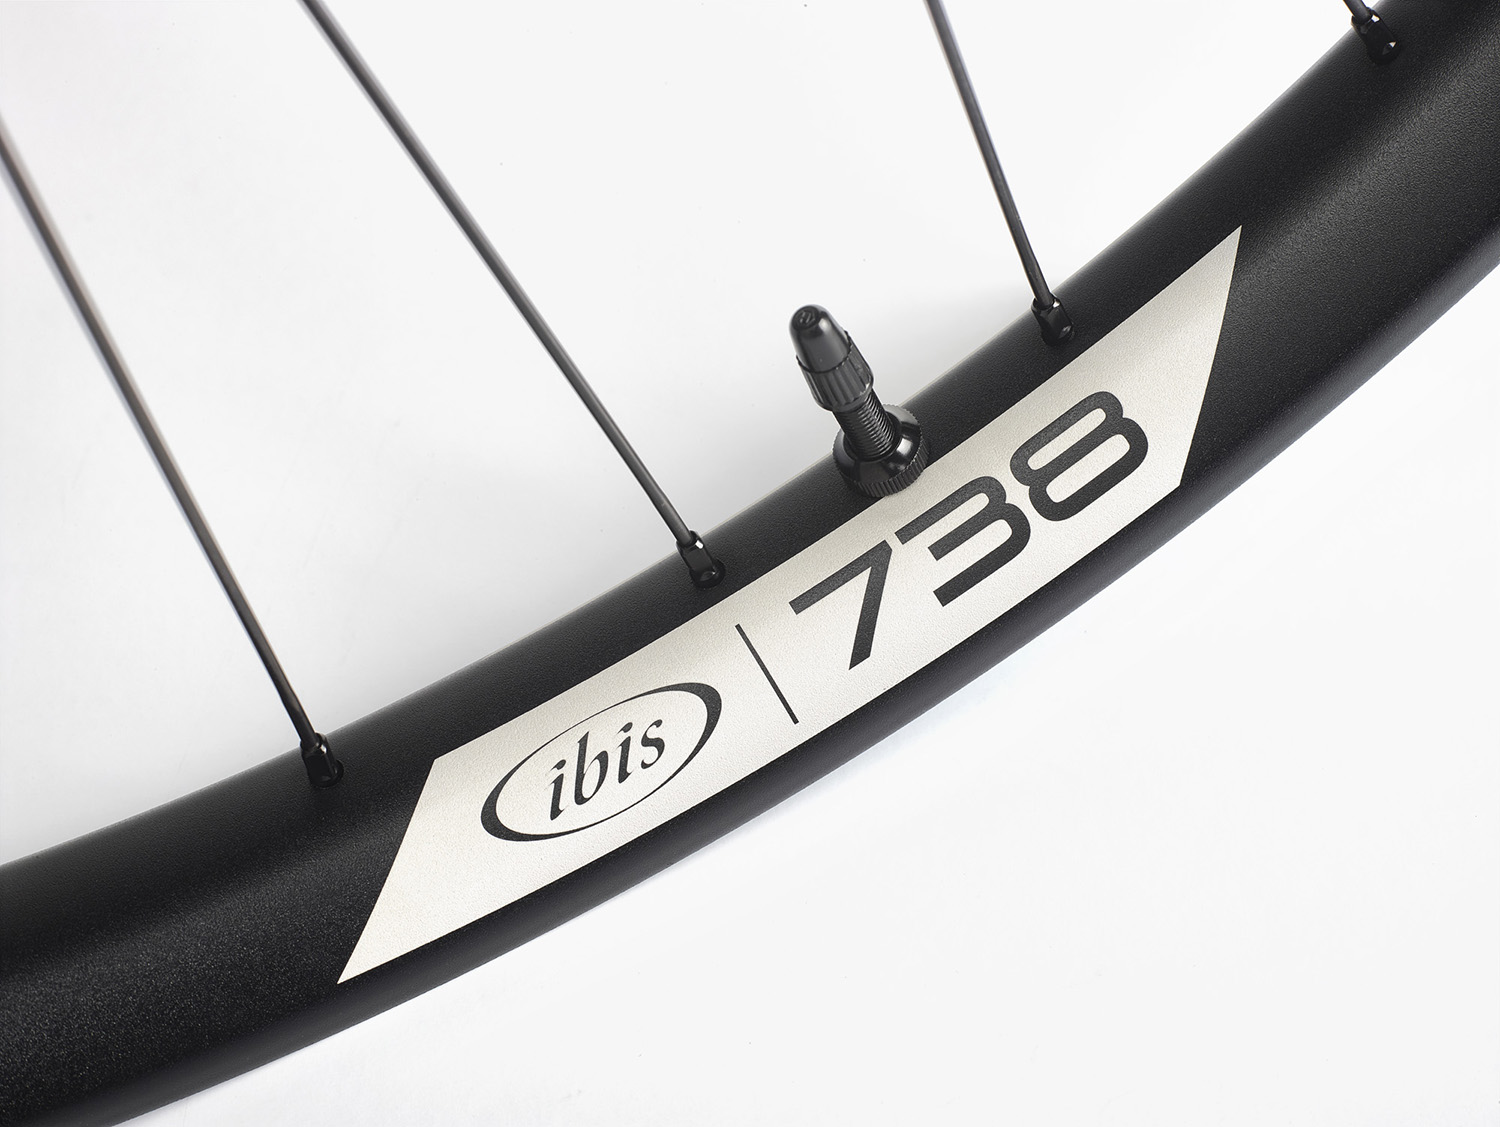 Pro Tip: For all our wheels the first number indicates the wheel size, 9 = 29”, 7 = 27.5”.